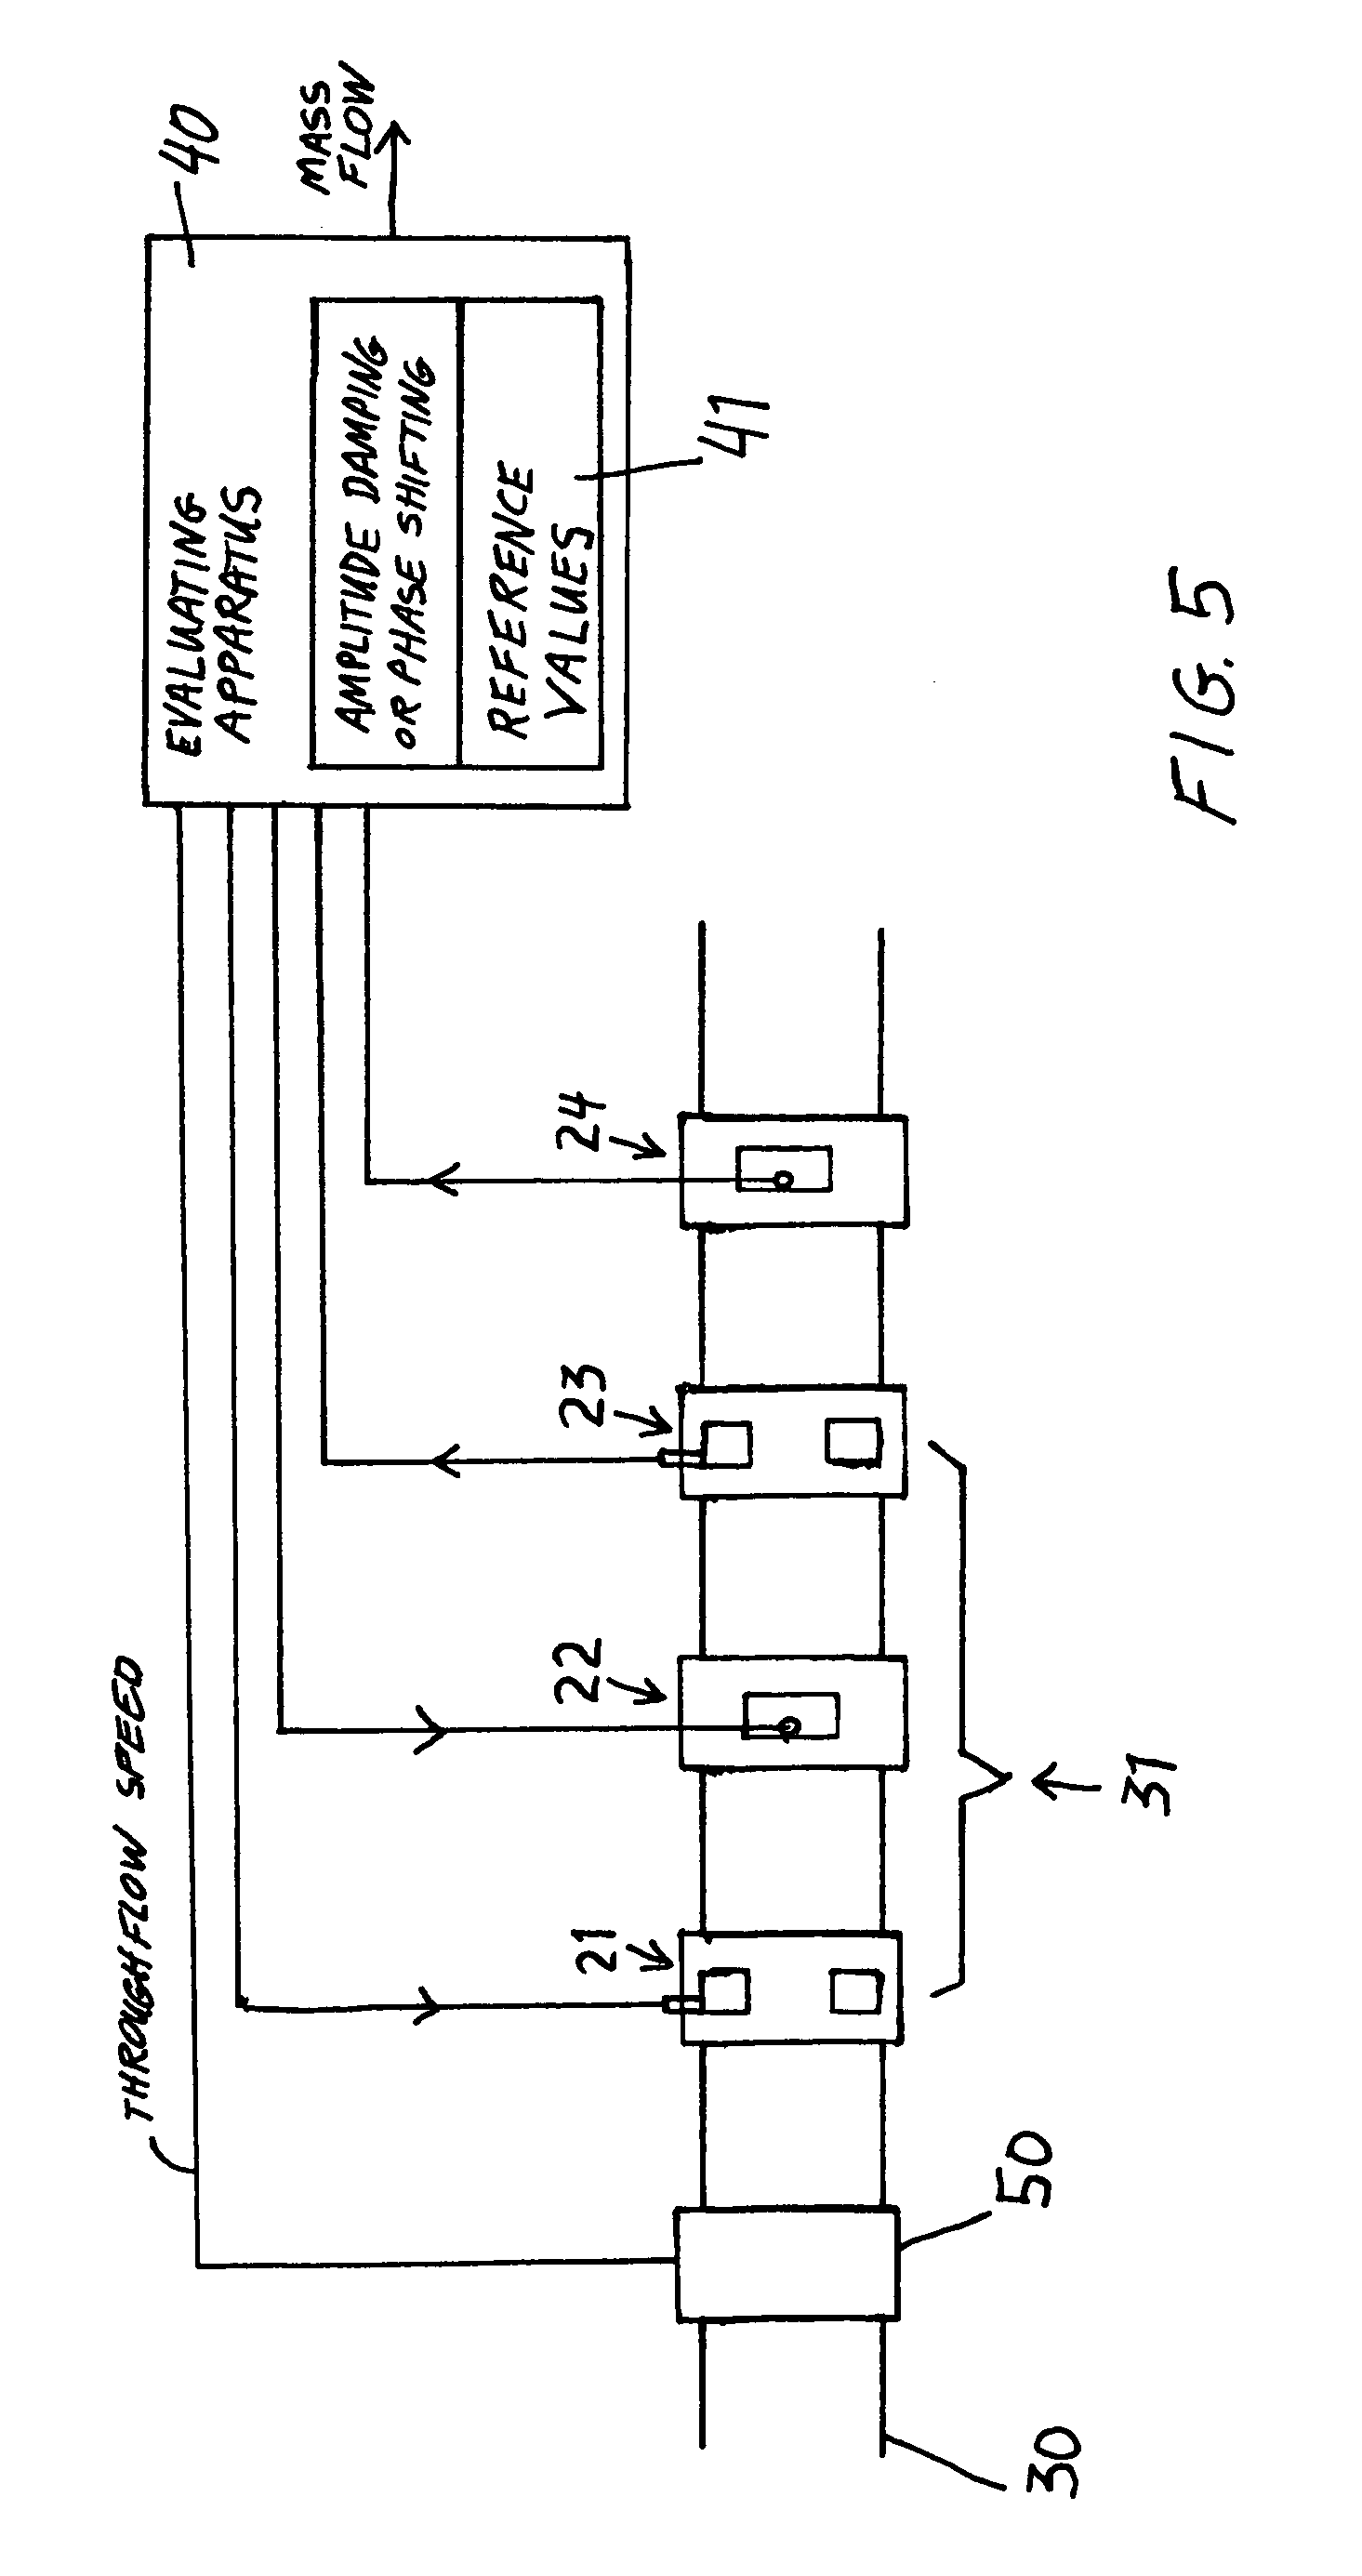 Antenna device for injecting or extracting microwaves into/from tubular hollow bodies, and device for measuring mass flow by using antenna devices of this type